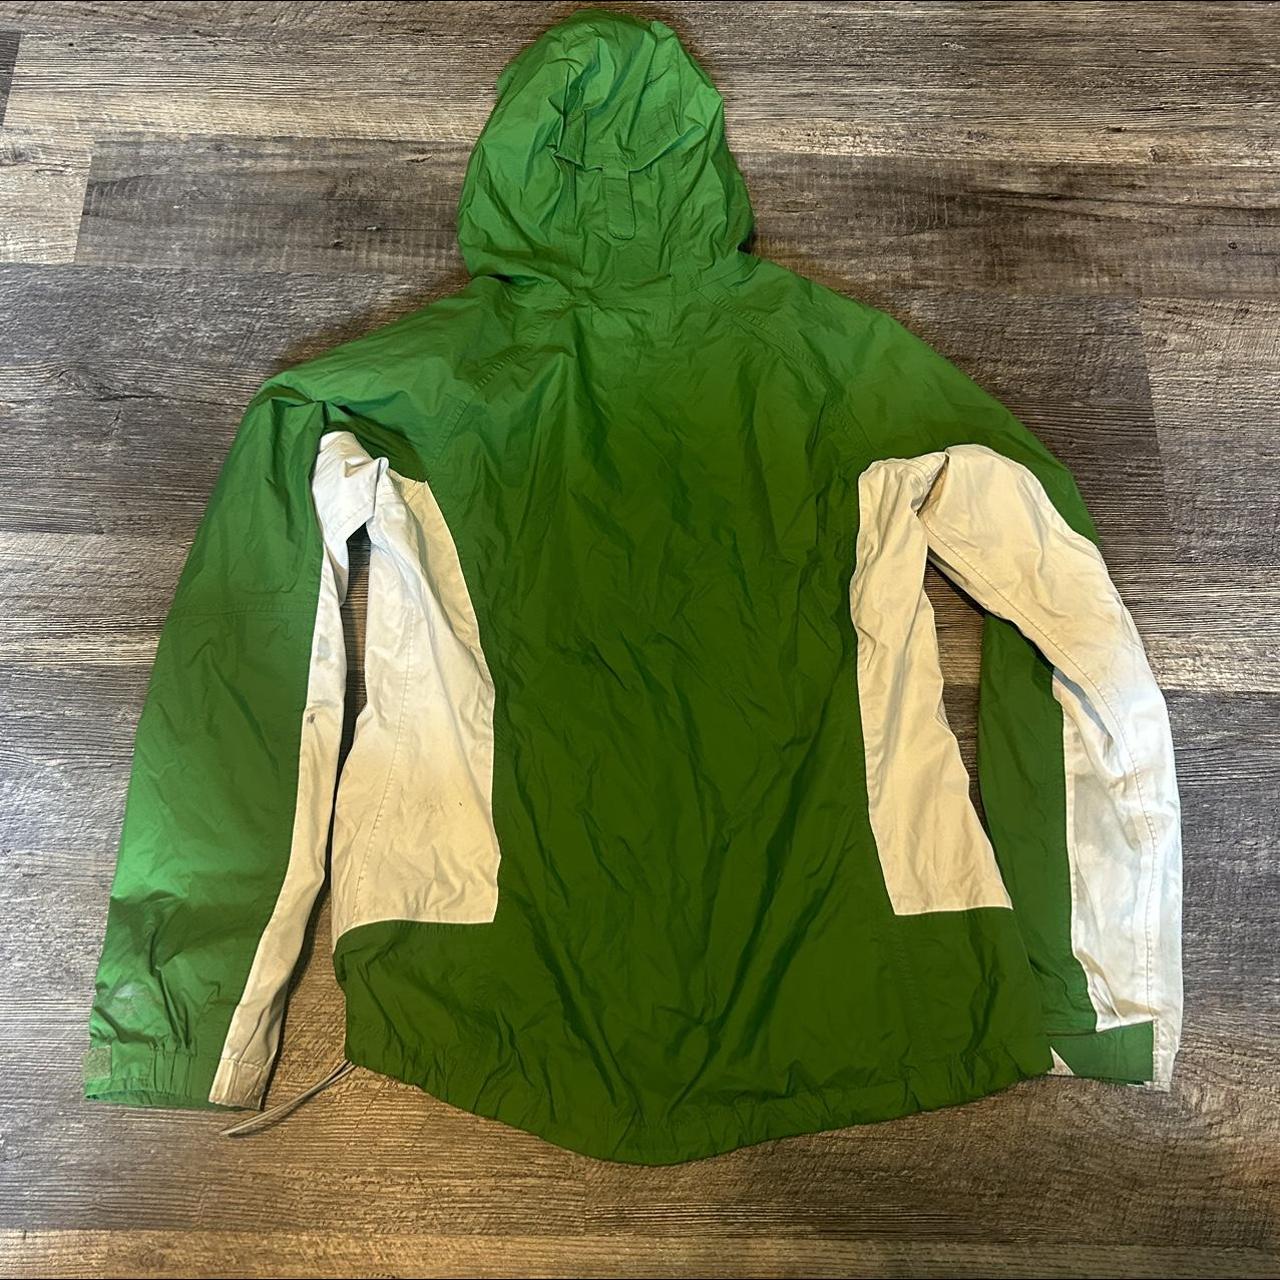 Green and White Columbia Jacket Size L (no... - Depop